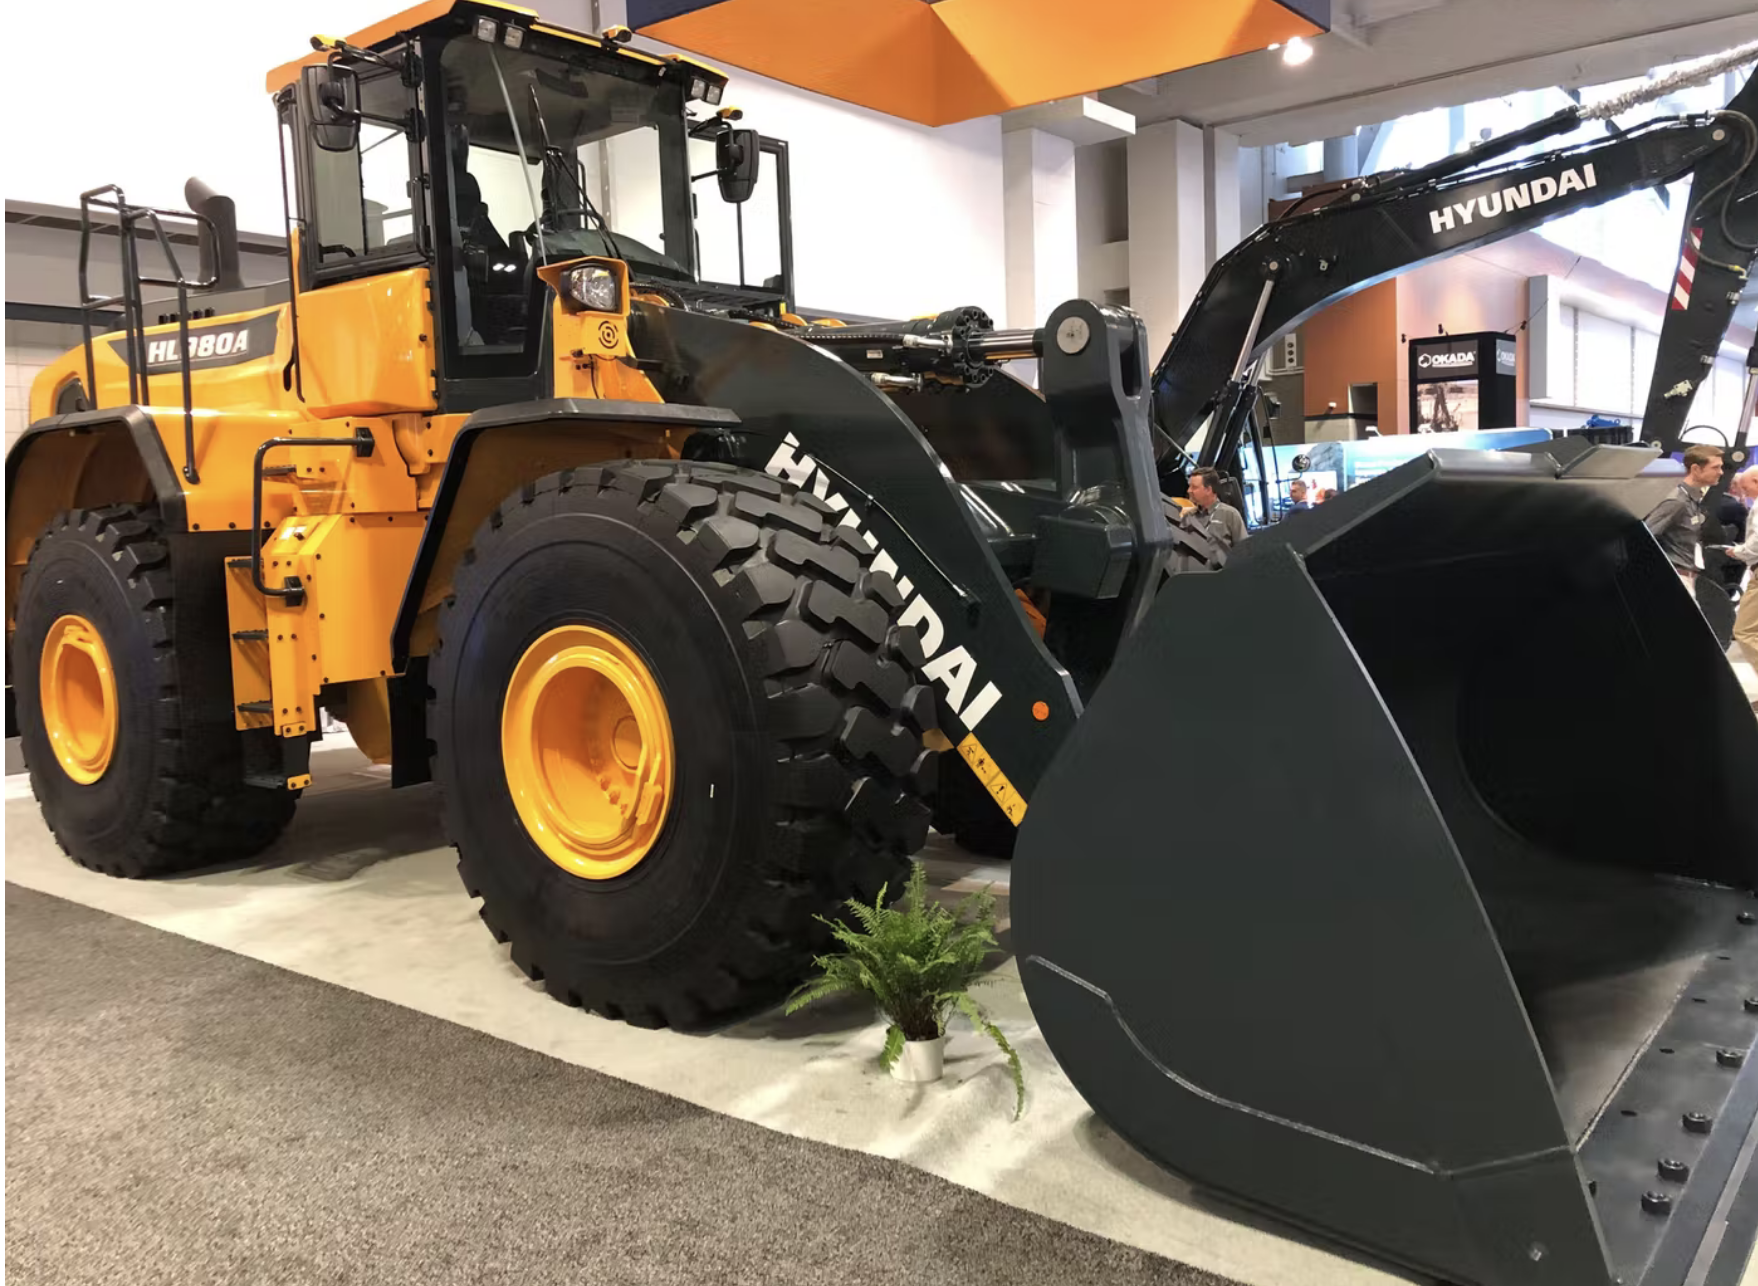 Check Out Hyundai's Largest Loader!